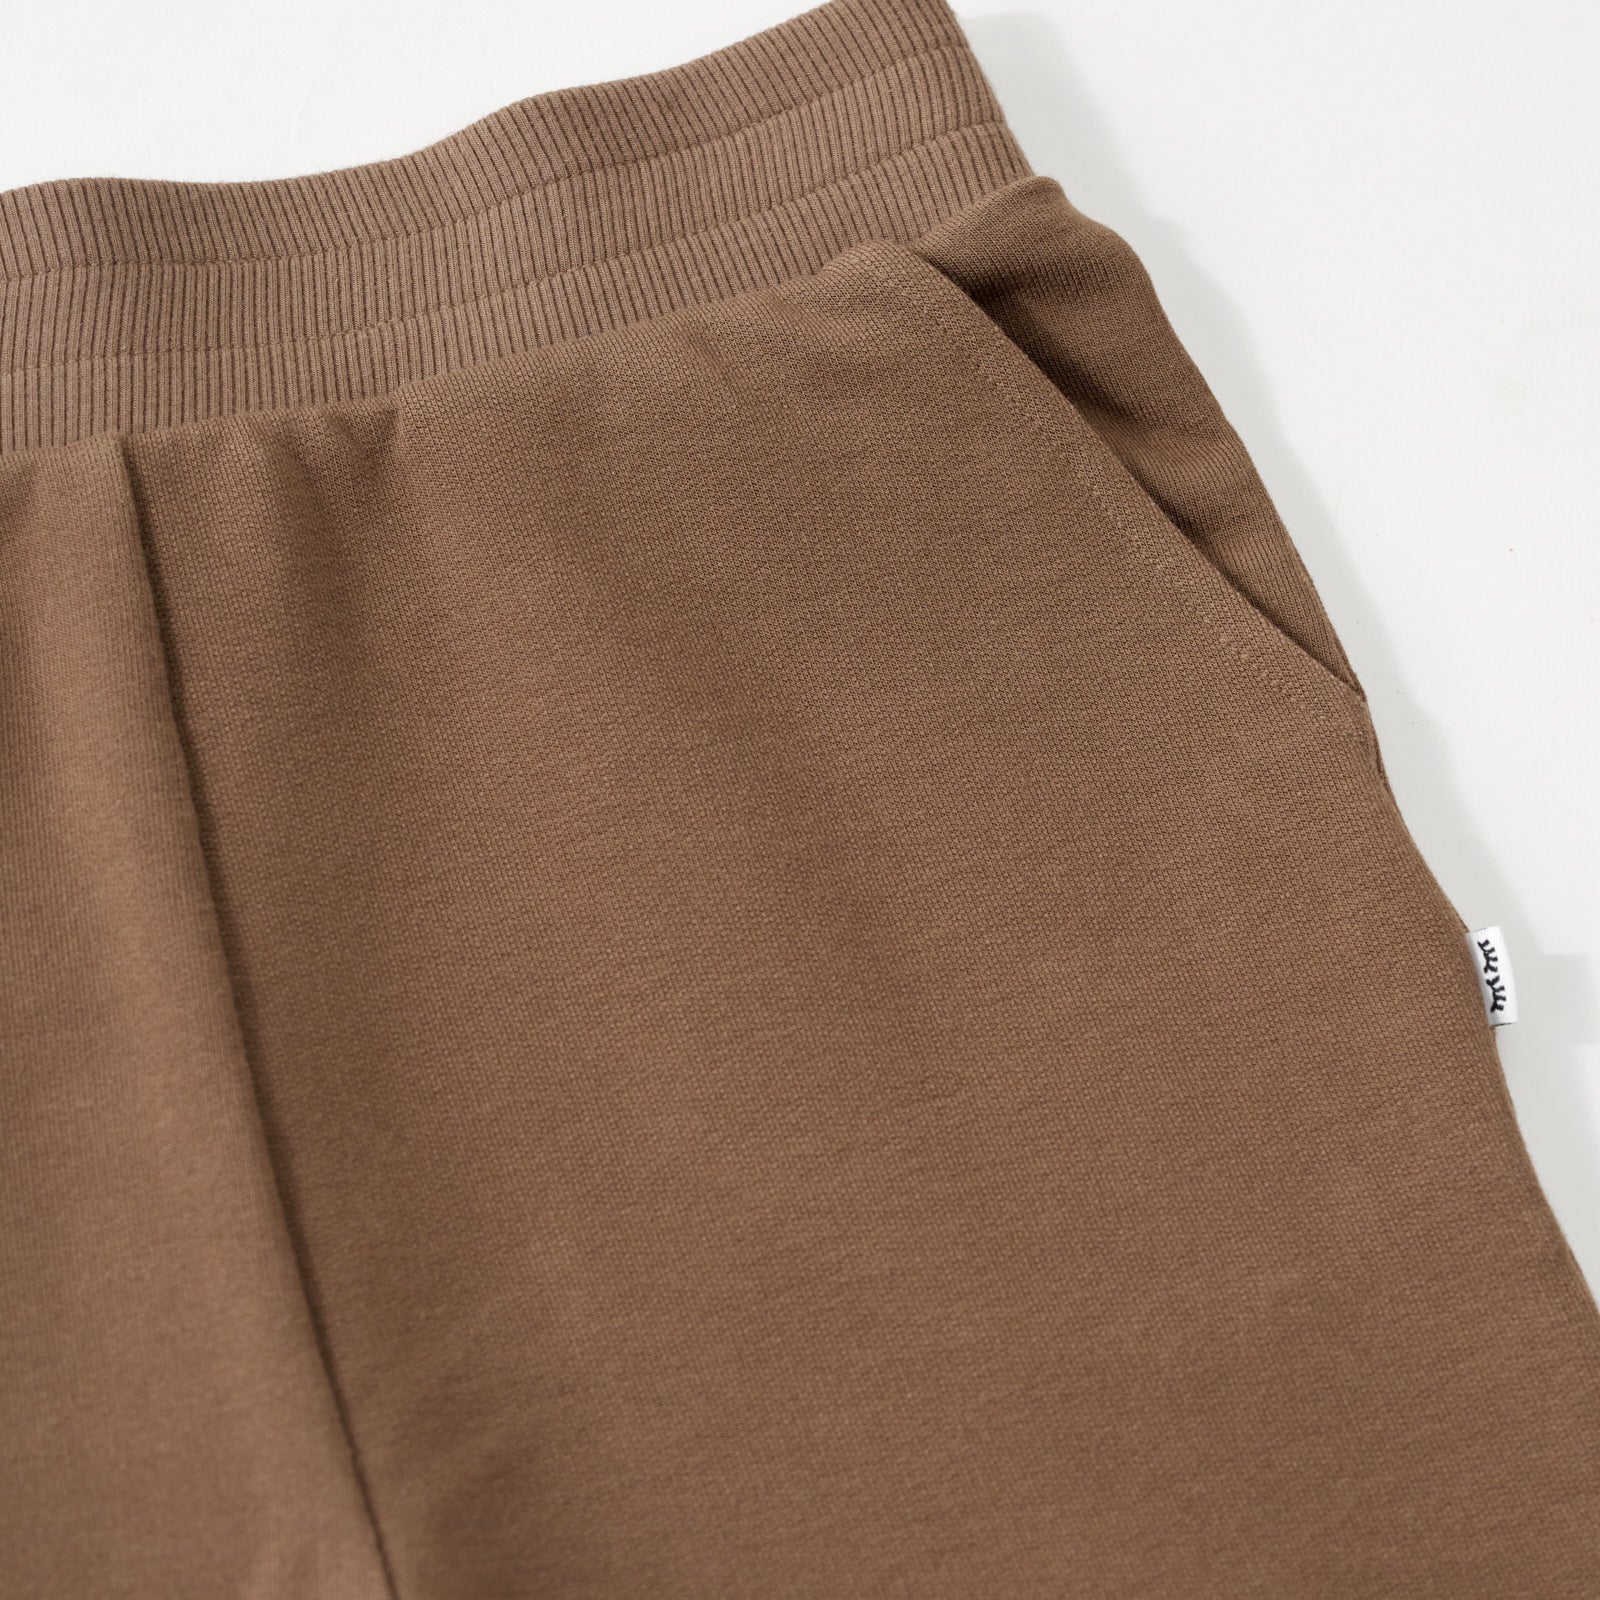 Close up flat lay image of the waist and side pocket detail on the Vintage Brown Jogger 